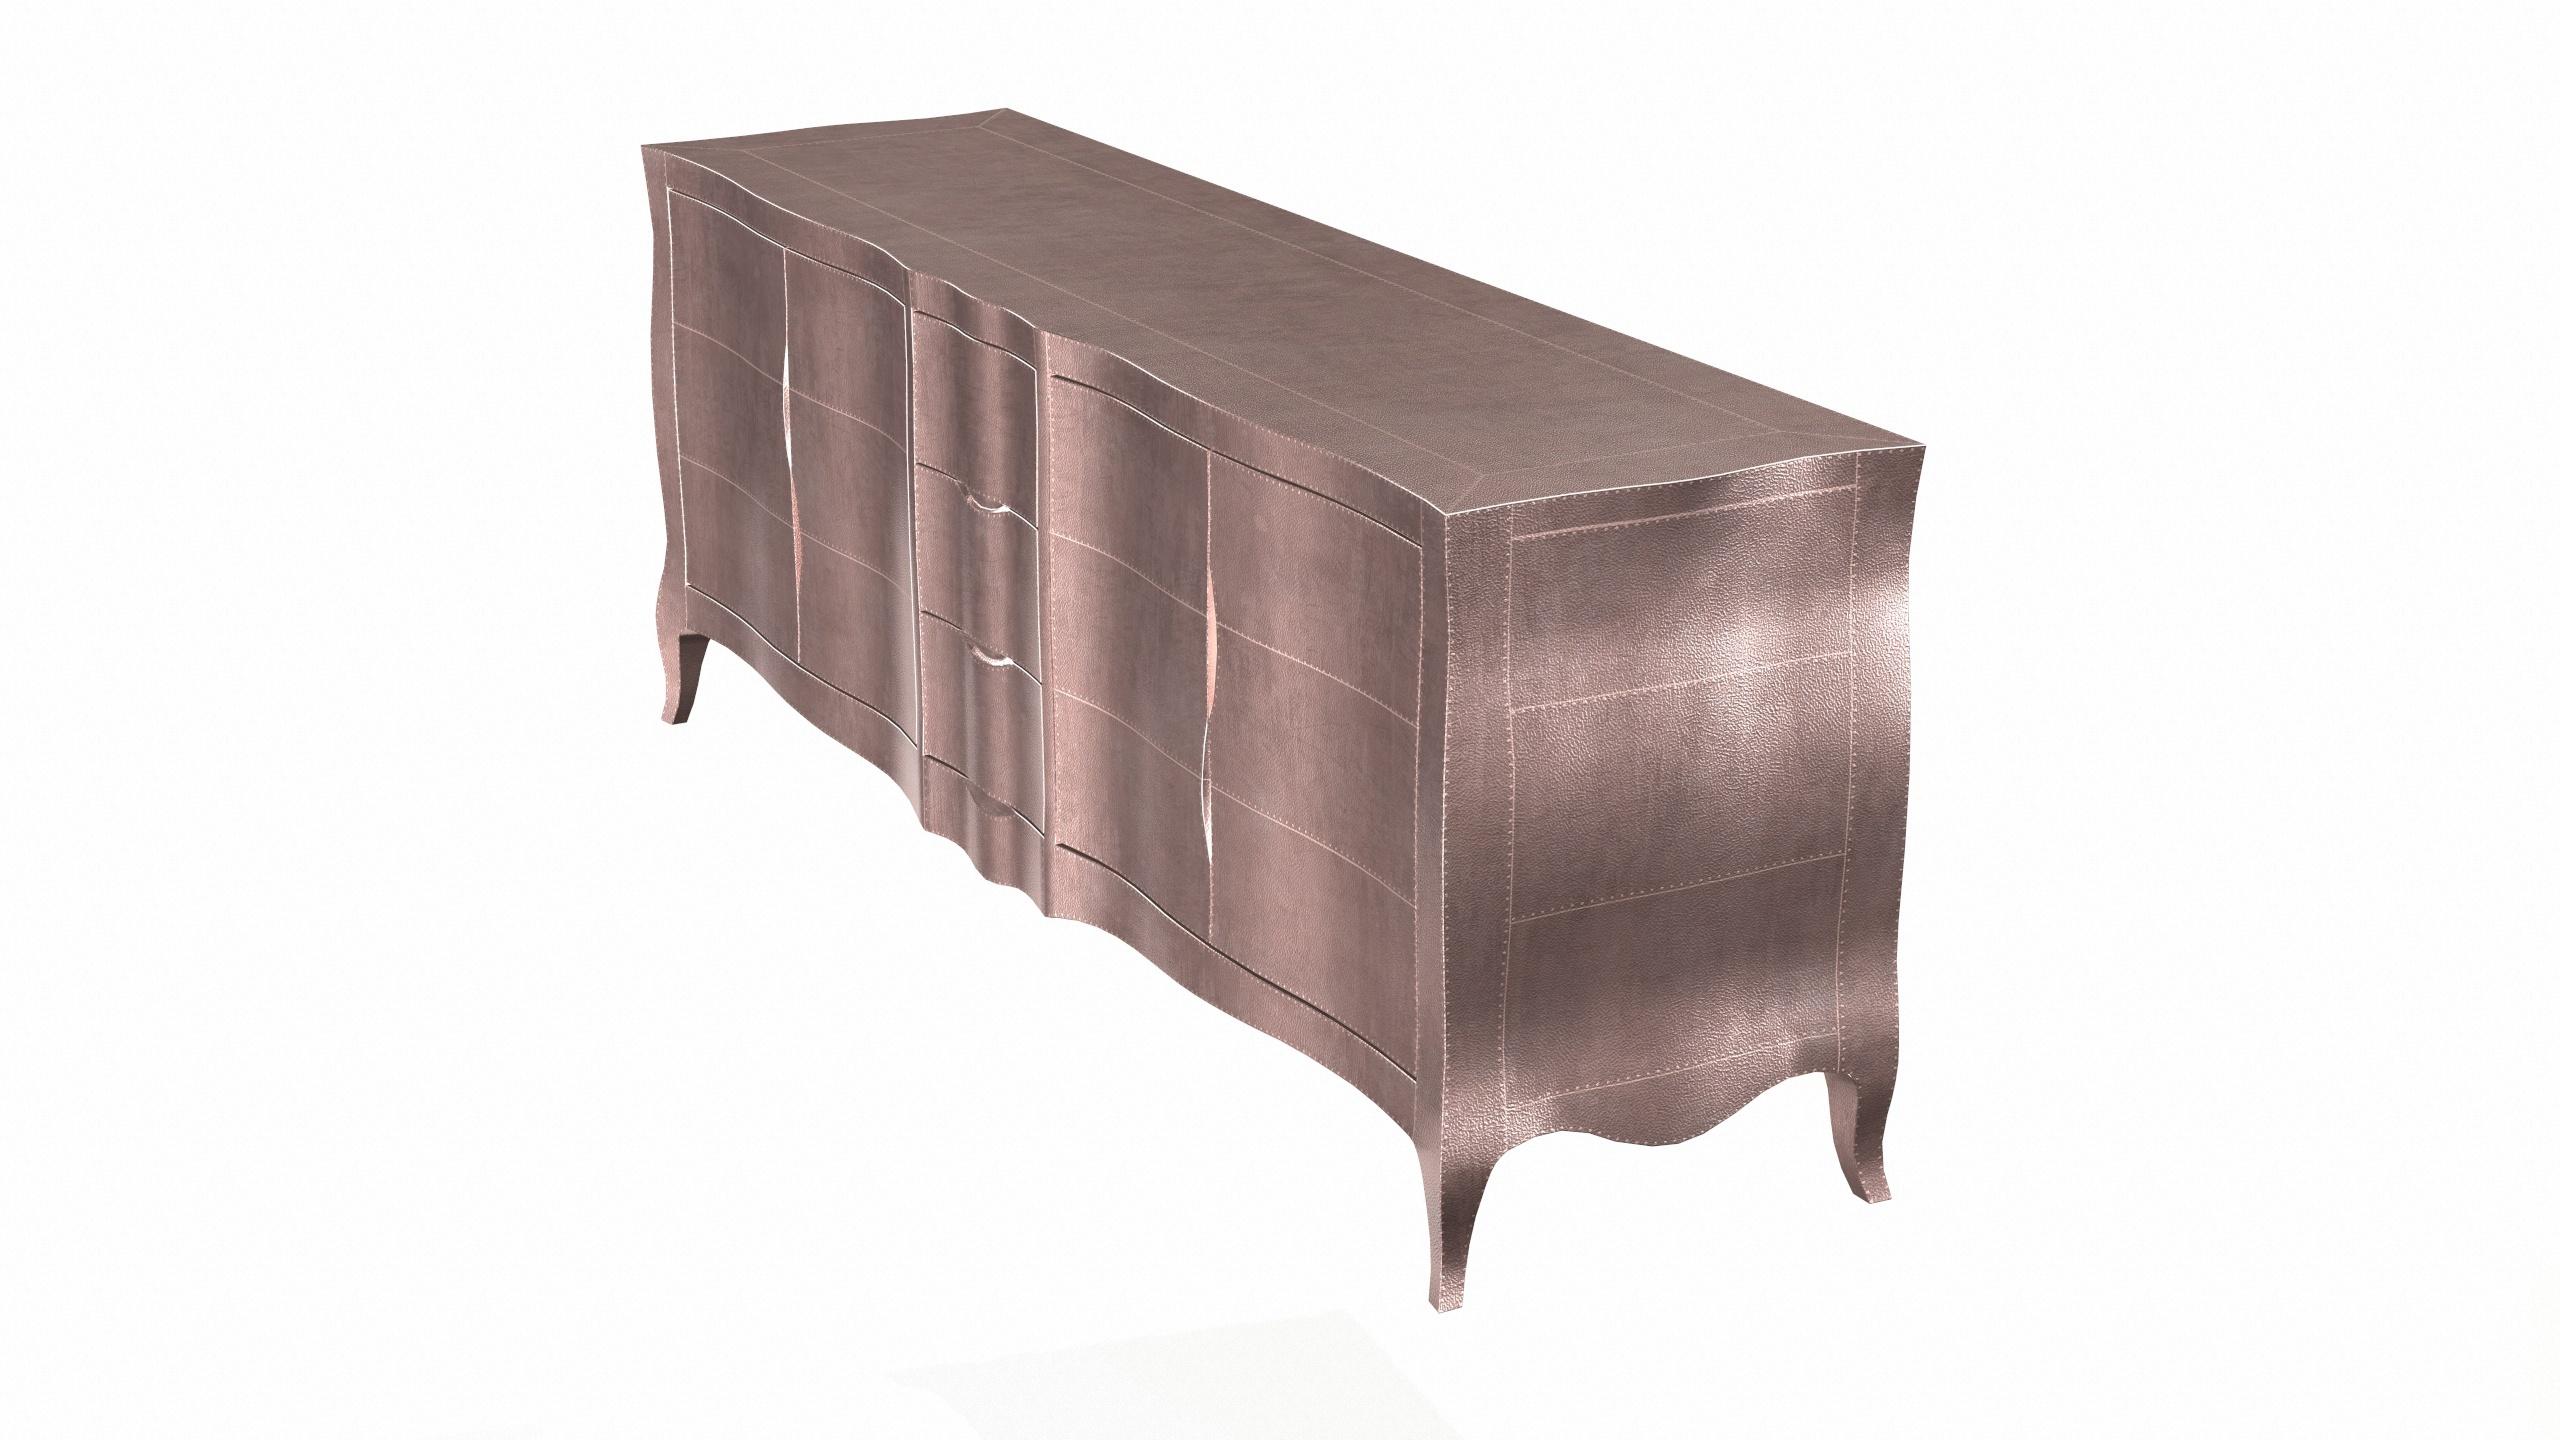 Hand-Carved Louise Credenza Art Deco Dressers in Fine Hammered Copper by Paul Mathieu For Sale